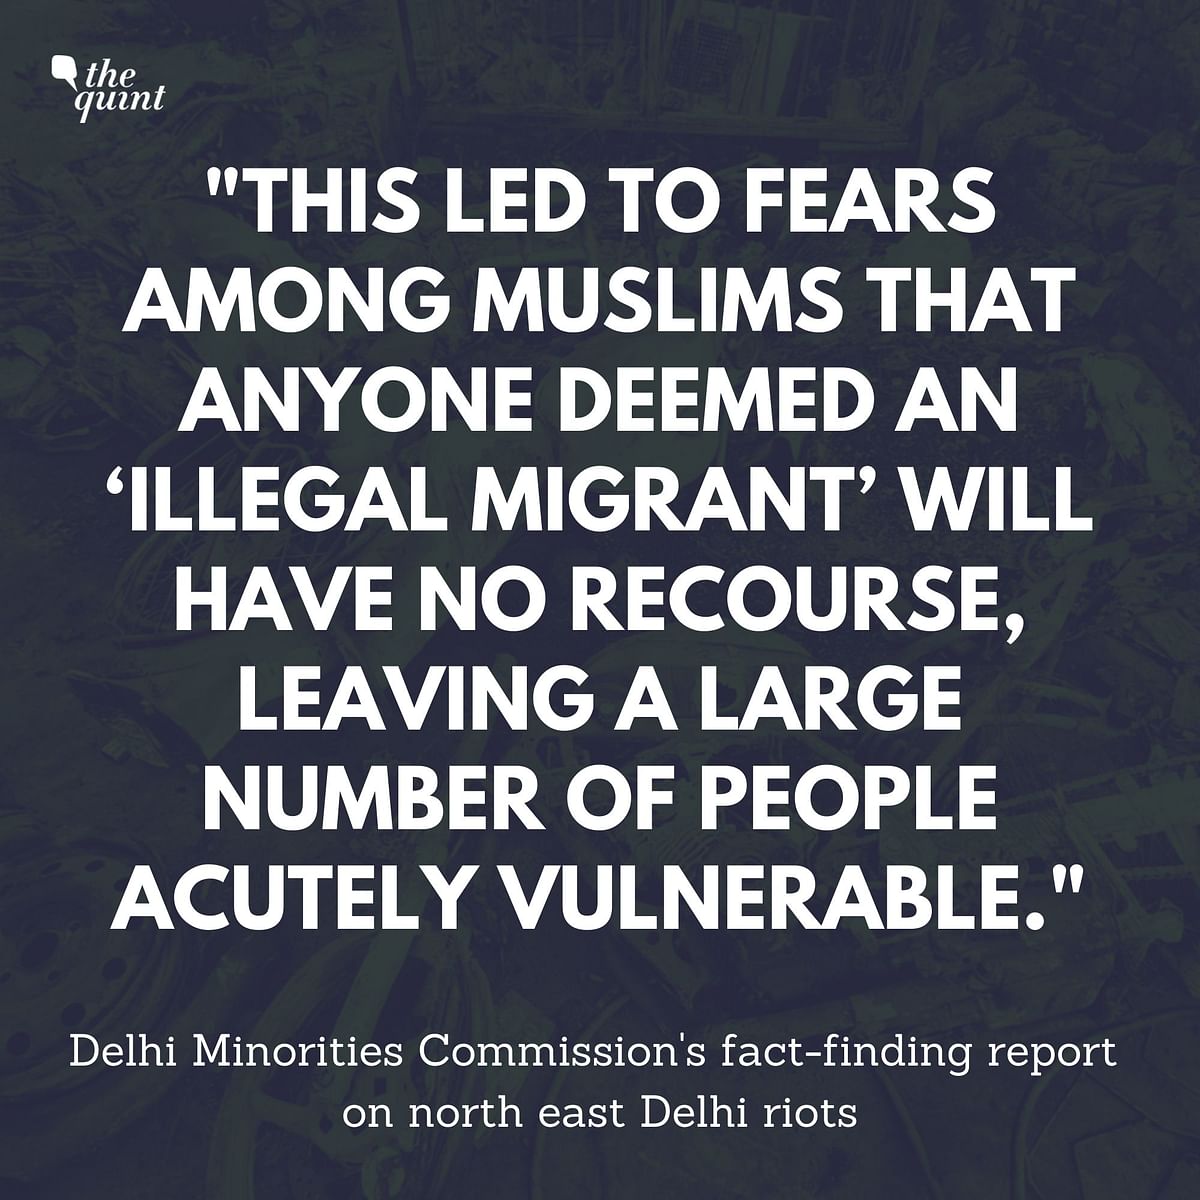 Delhi Minorities Commission’s fact-finding report on Delhi riots mentions Kapil Mishra’s speech among other details.